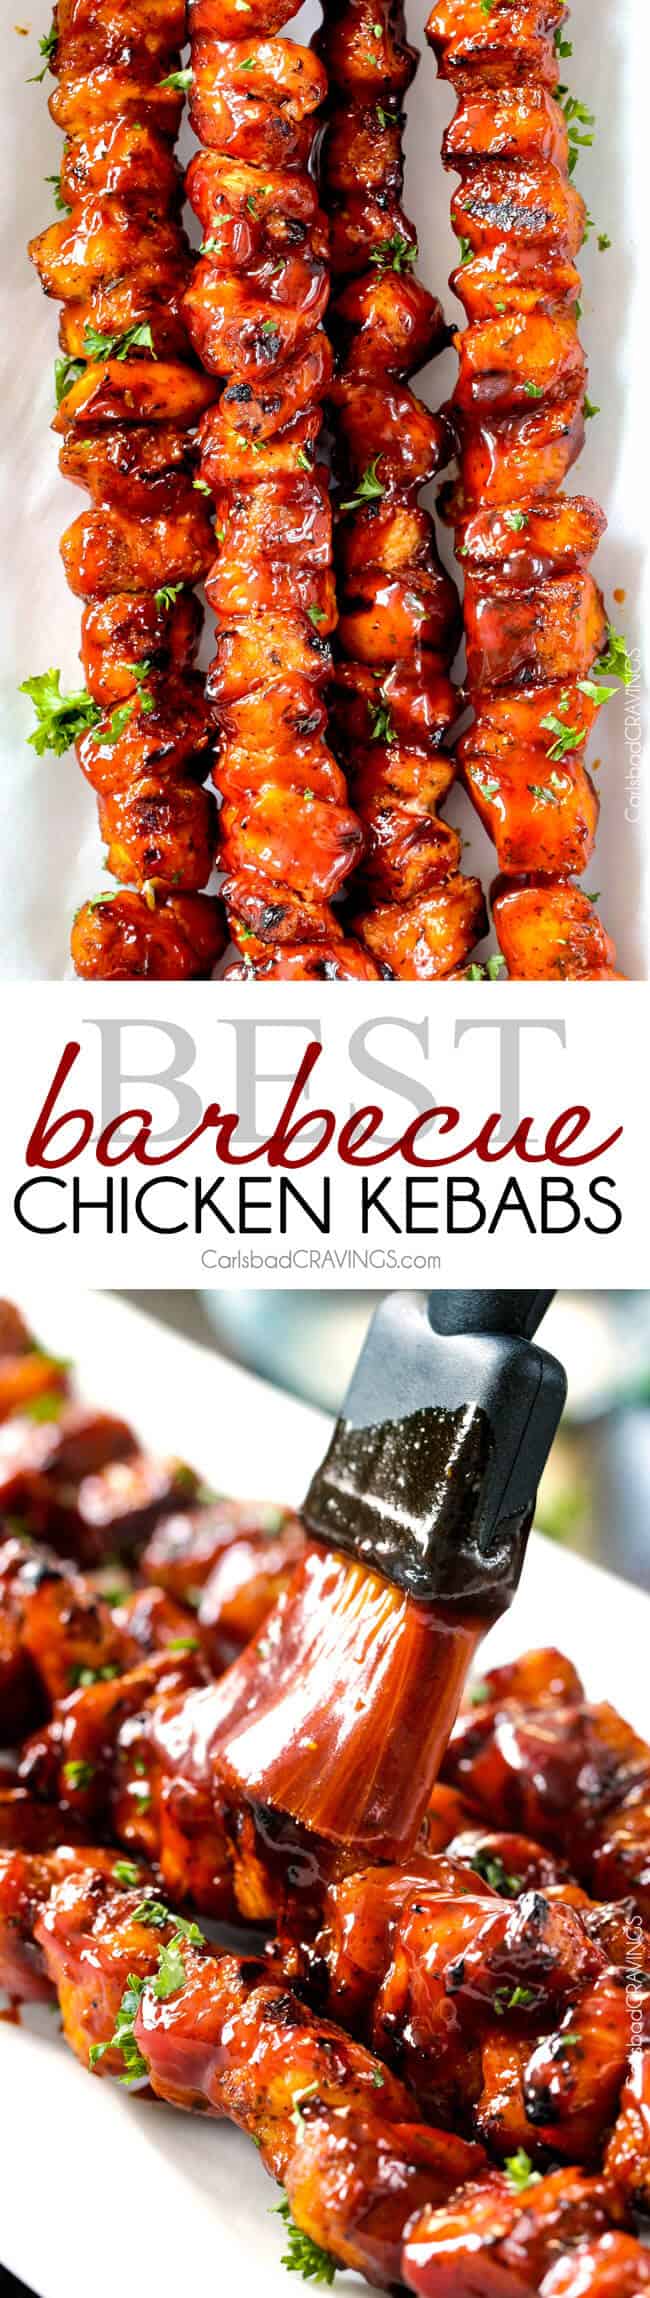 These BBQ Chicken Kebabs are my go-to grill recipe with the most amazing barbecue sauce! Everyone always asks me for the recipe and they are easy too!